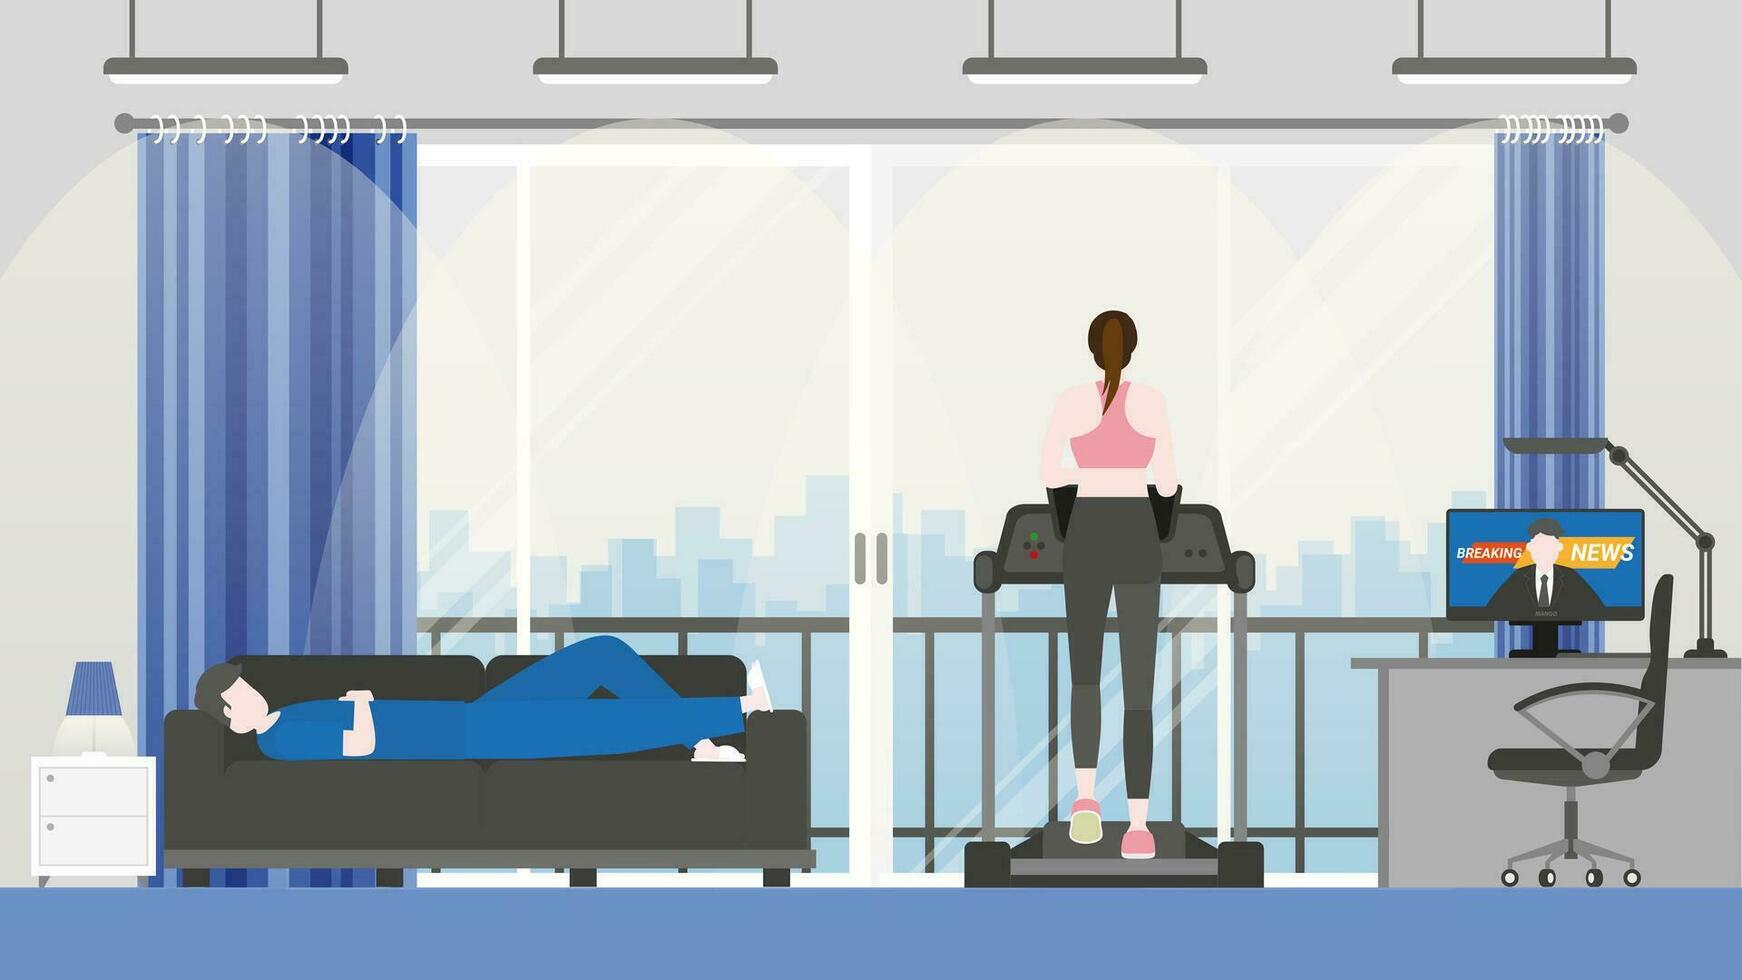 Man is sleeping on sofa and woman has exercise running on treadmill. vector